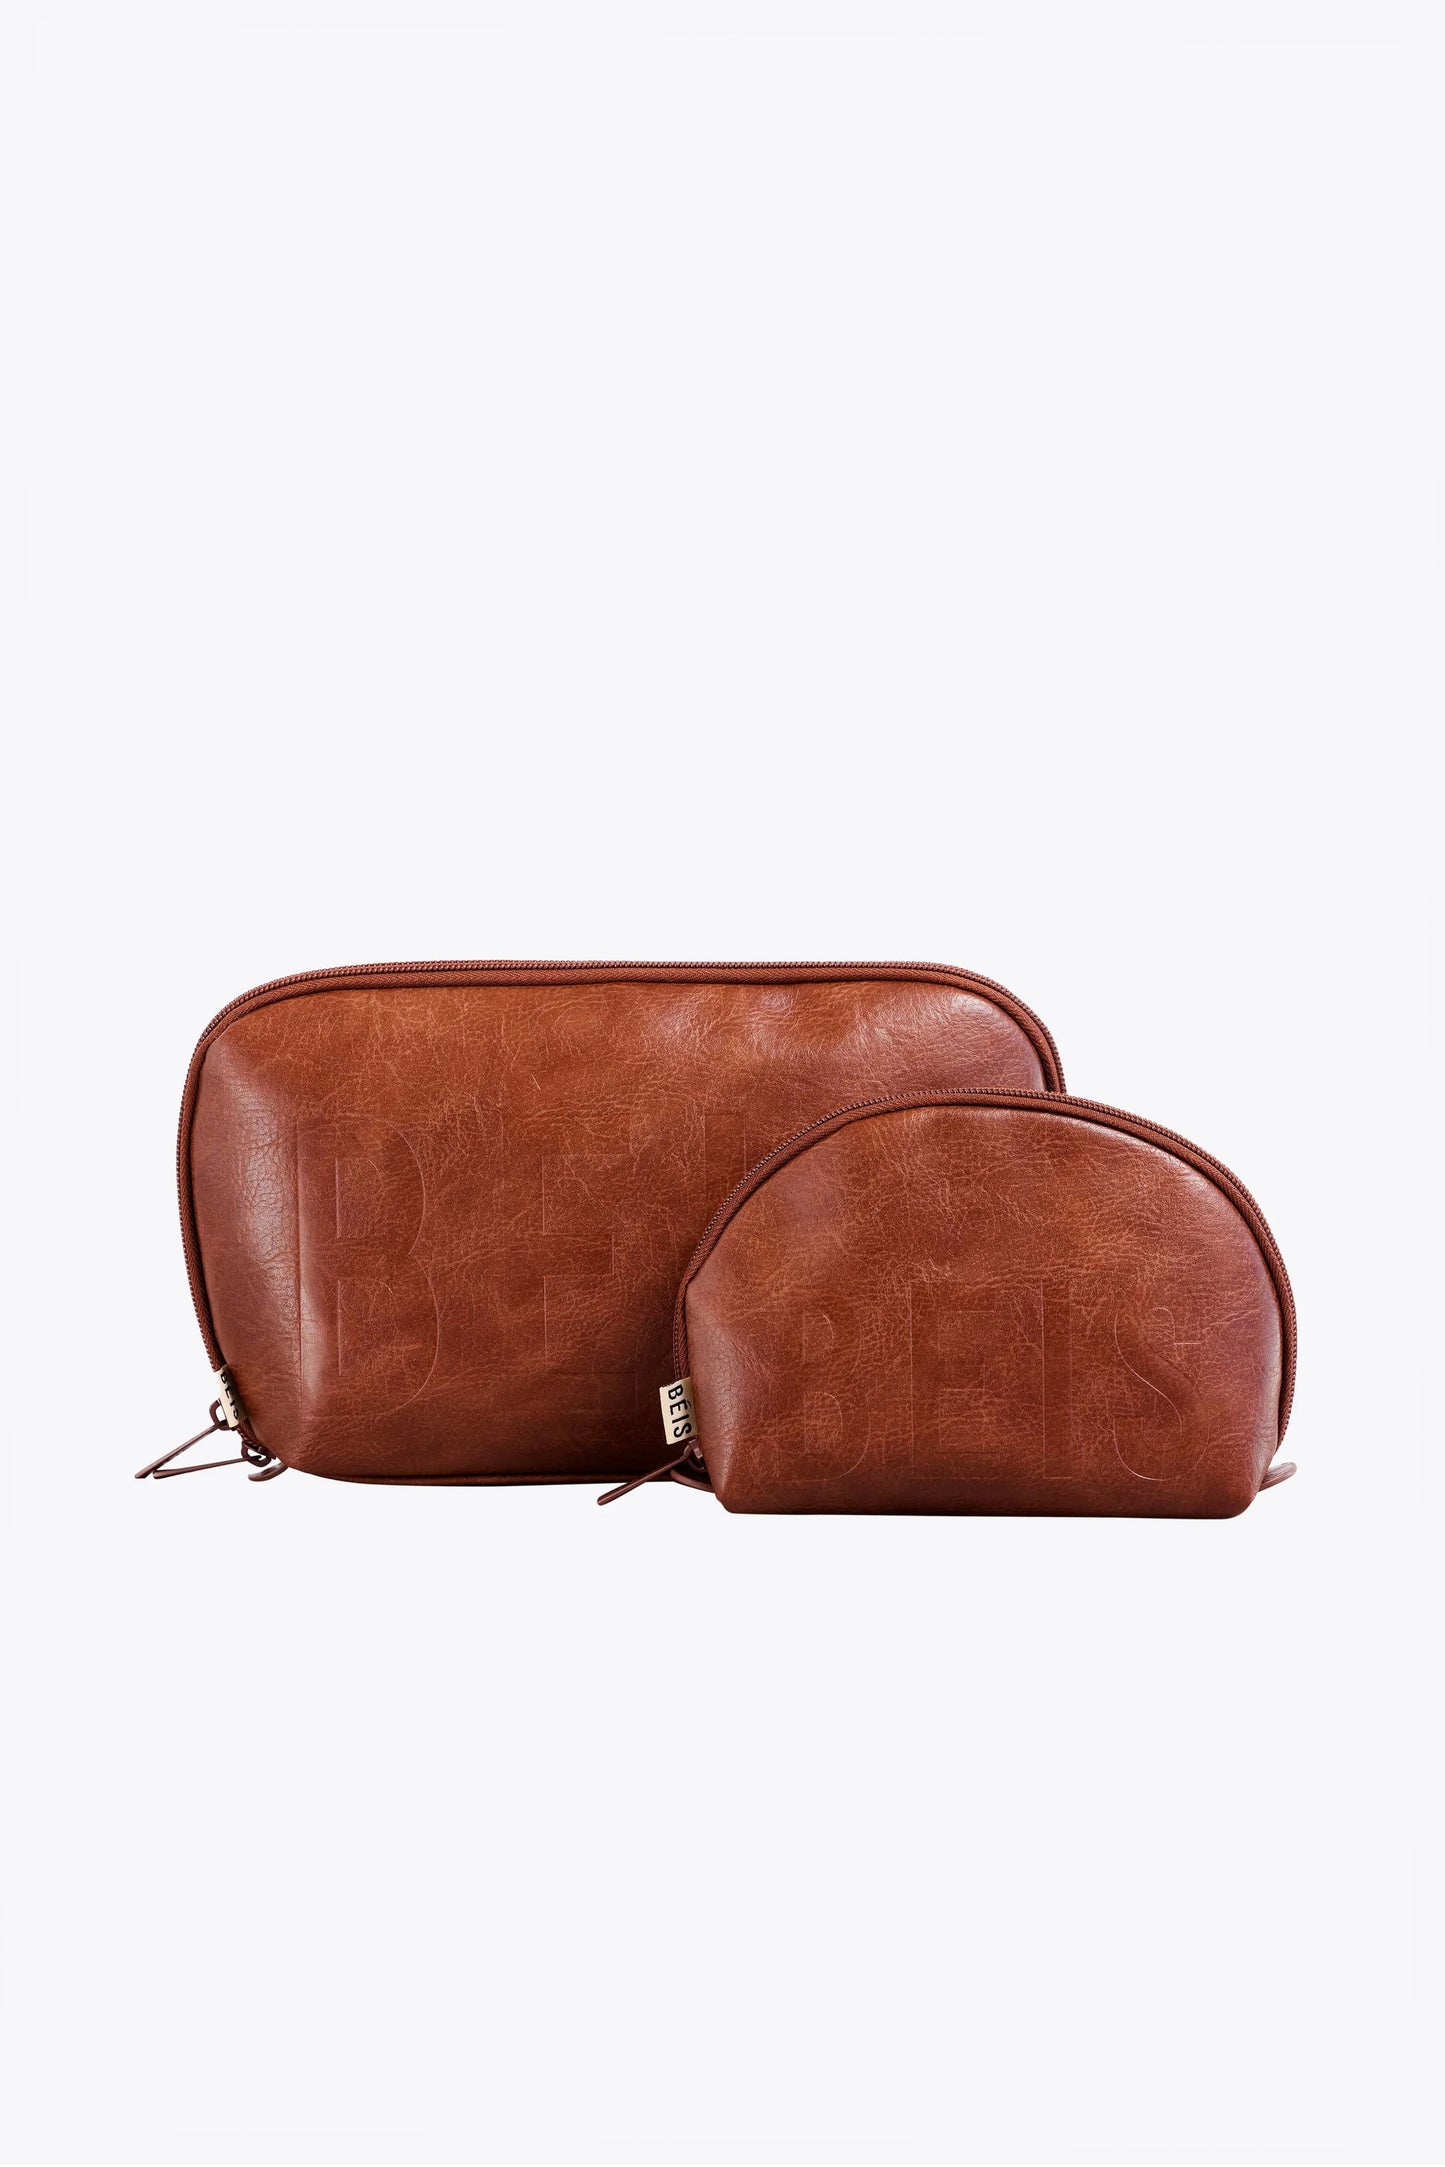 The Cosmetic Pouch Set in Maple